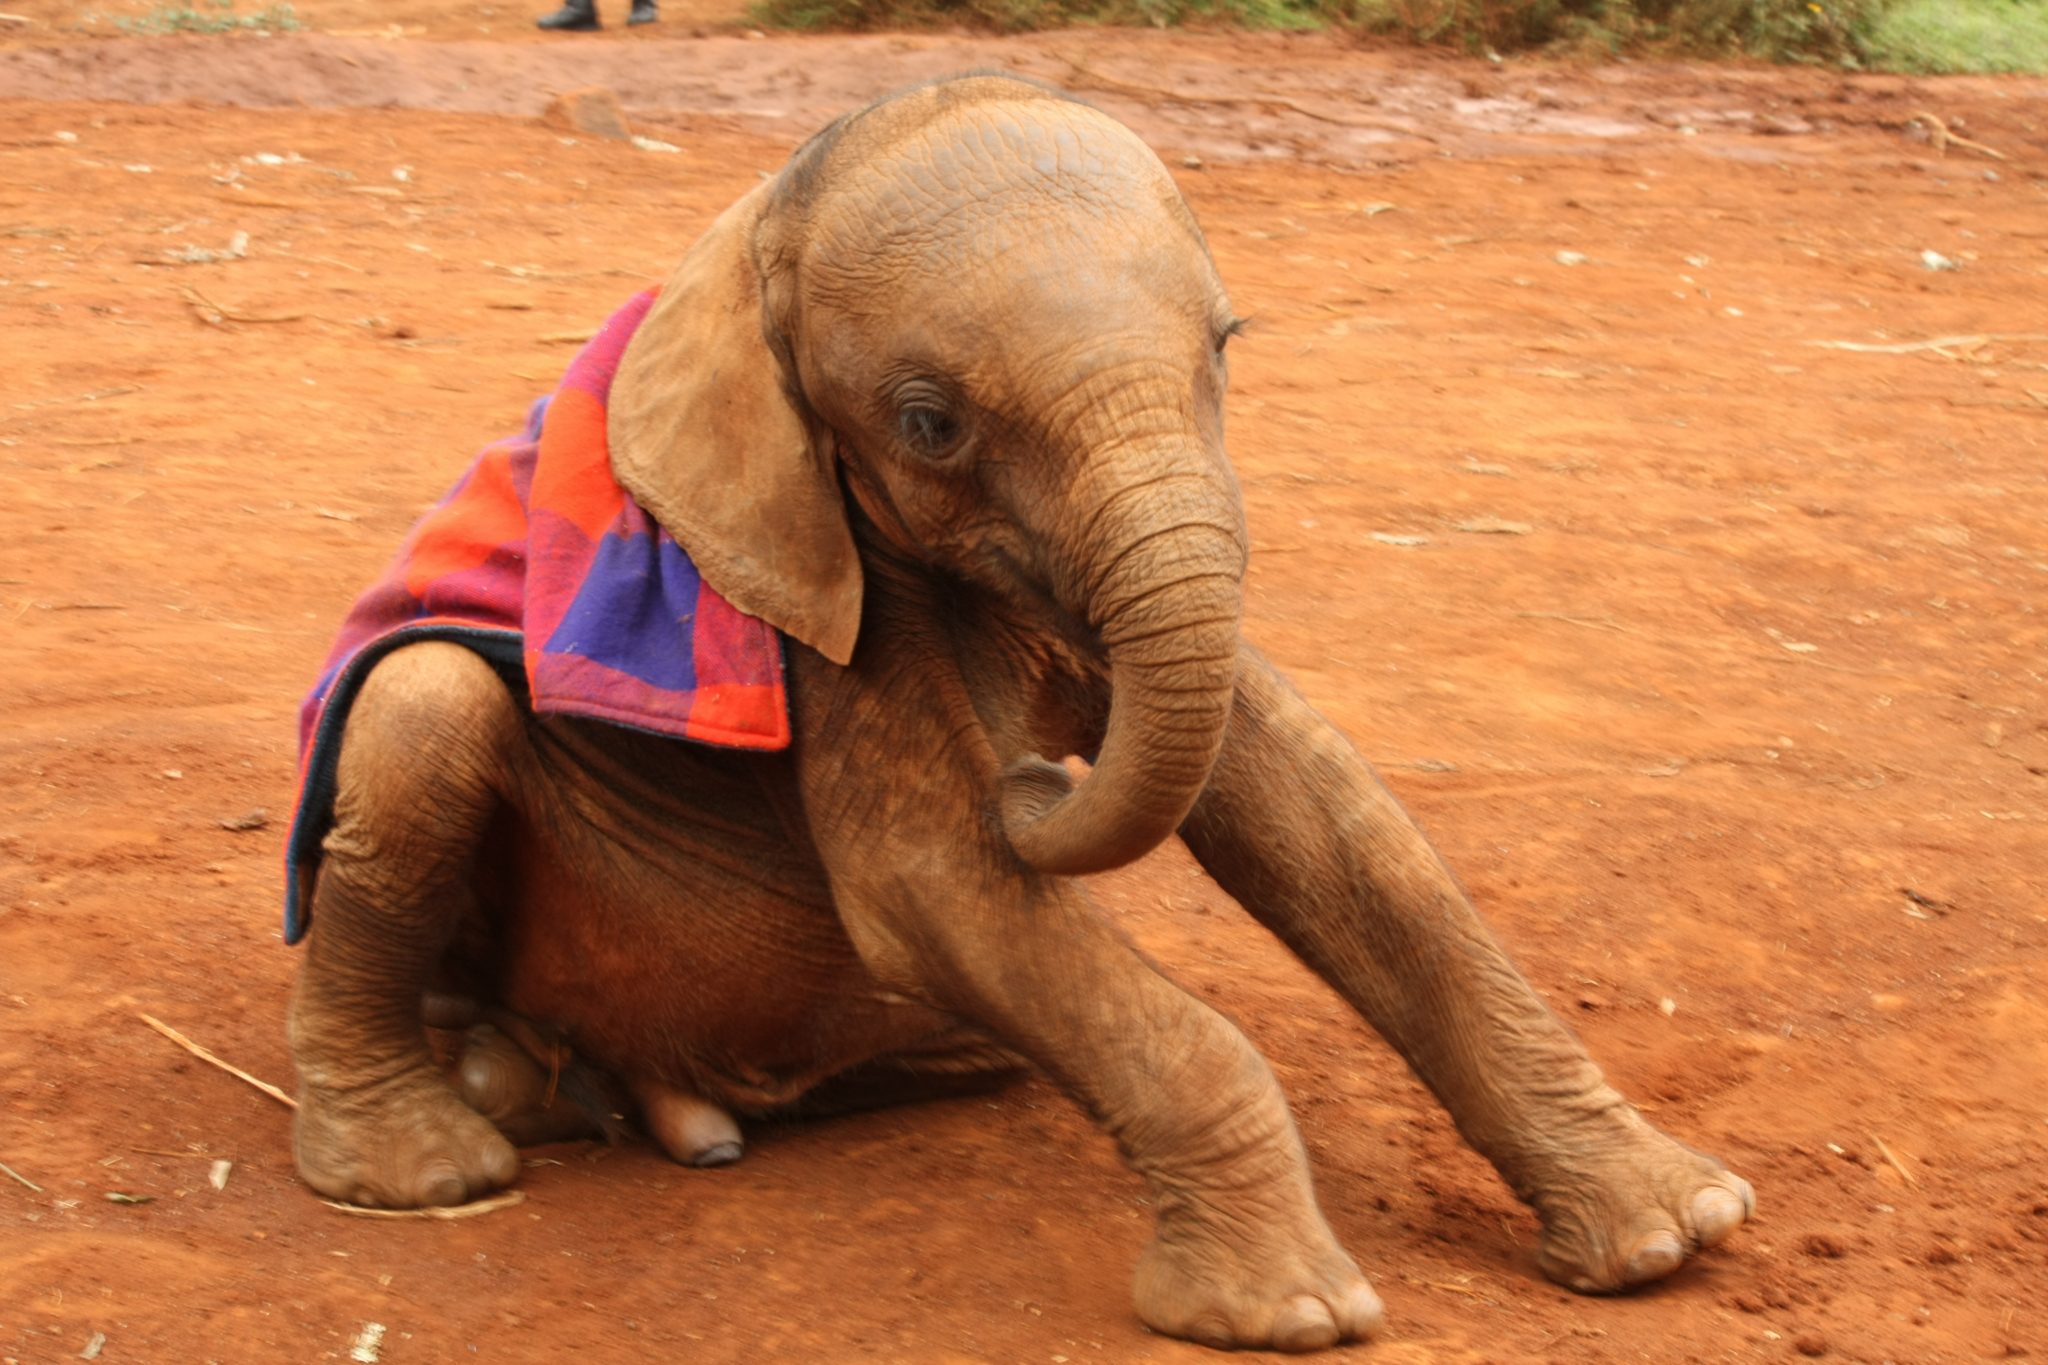 A picture of an baby elephant covered in a blue and red blanket sitting down on red soil.